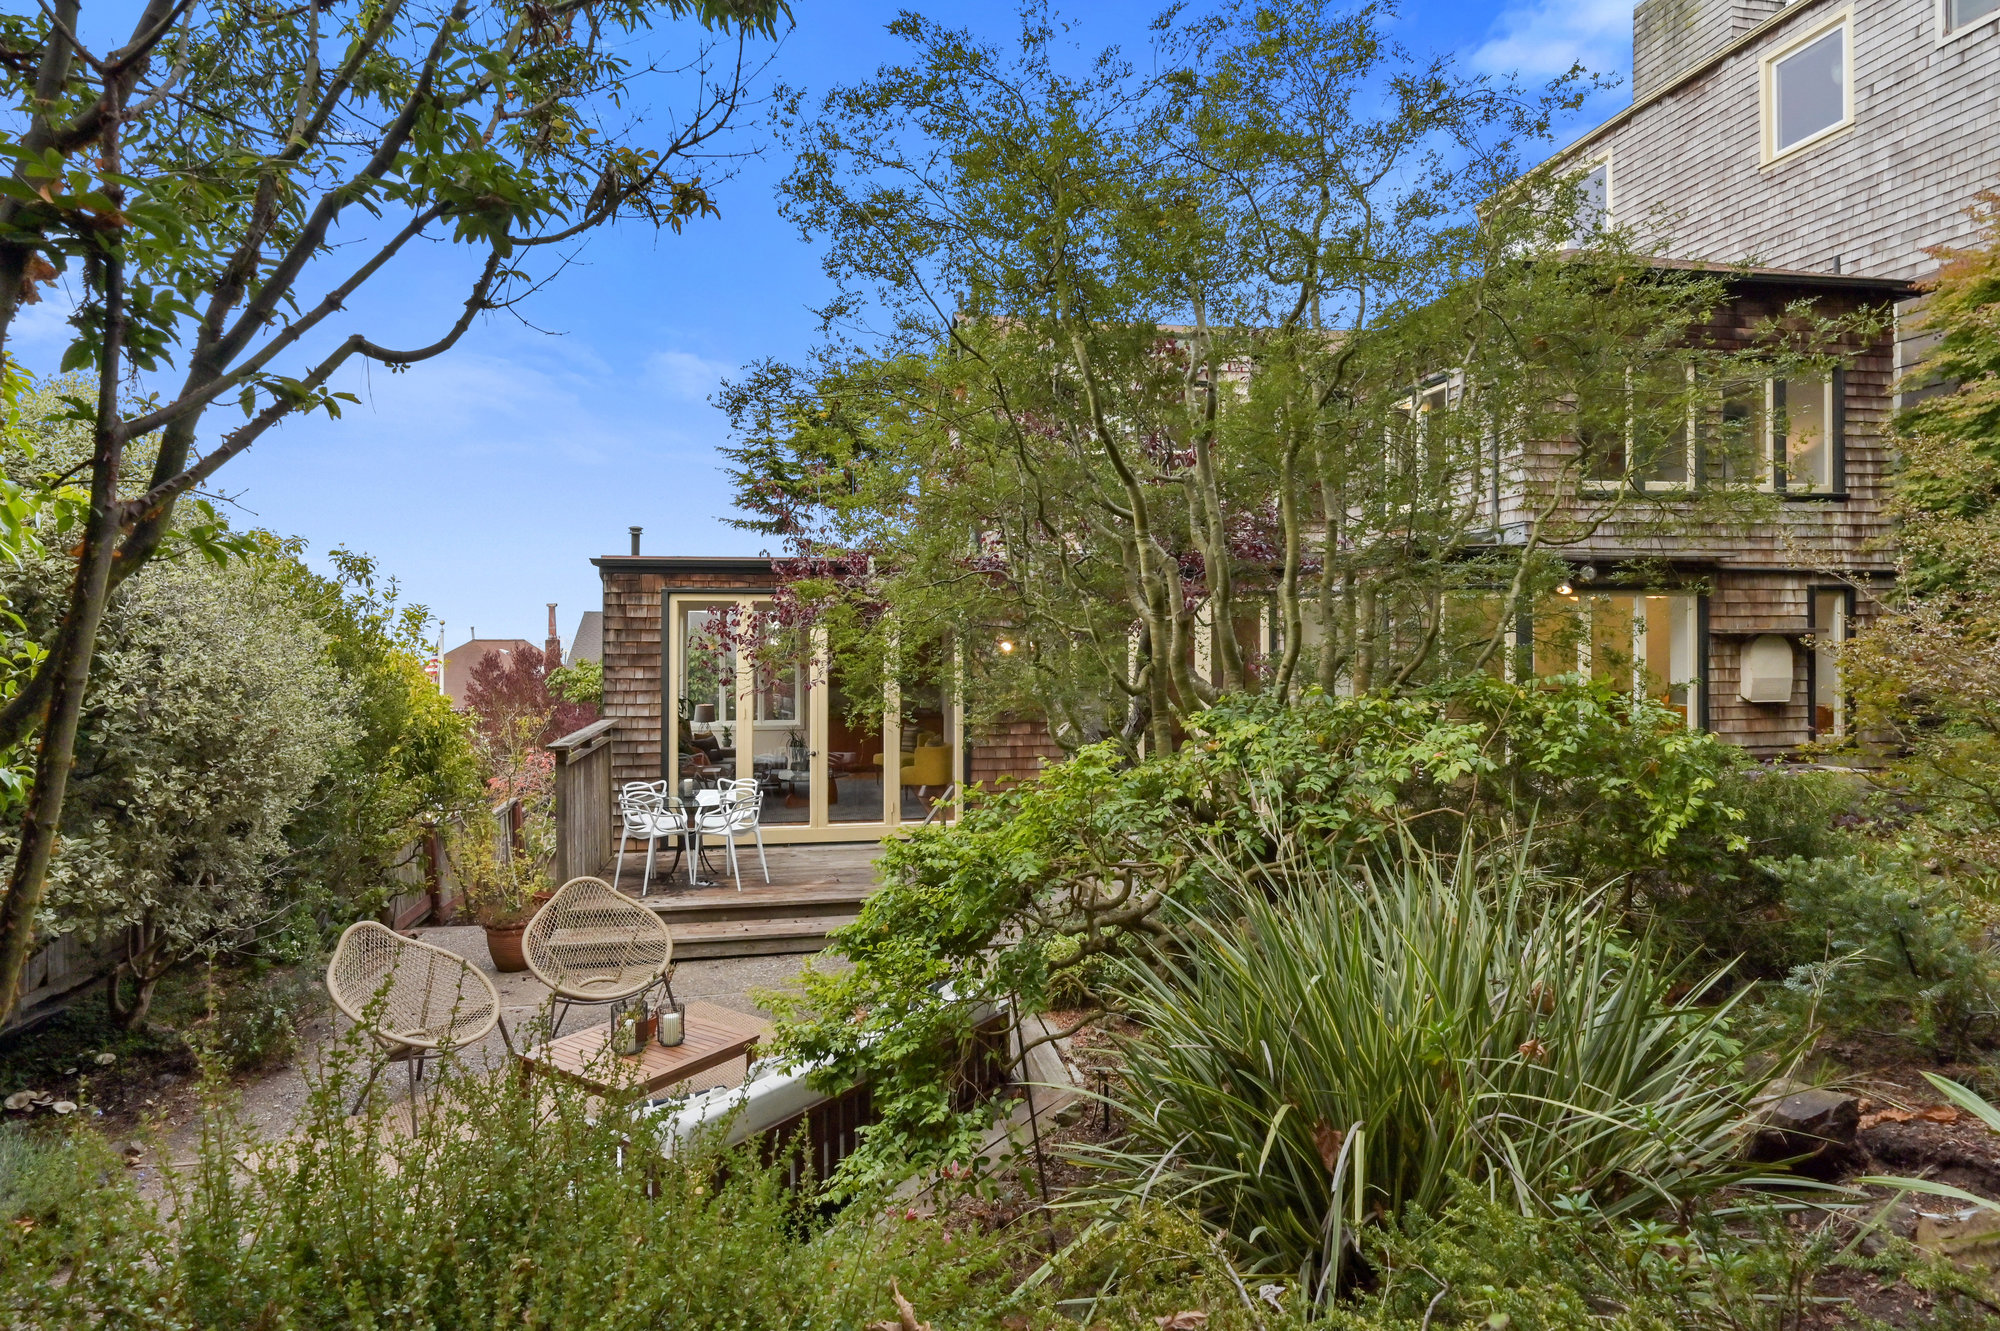 Property Photo: Rear gardens and lush plant life at 183 Edgewood Avenue in Cole Valley